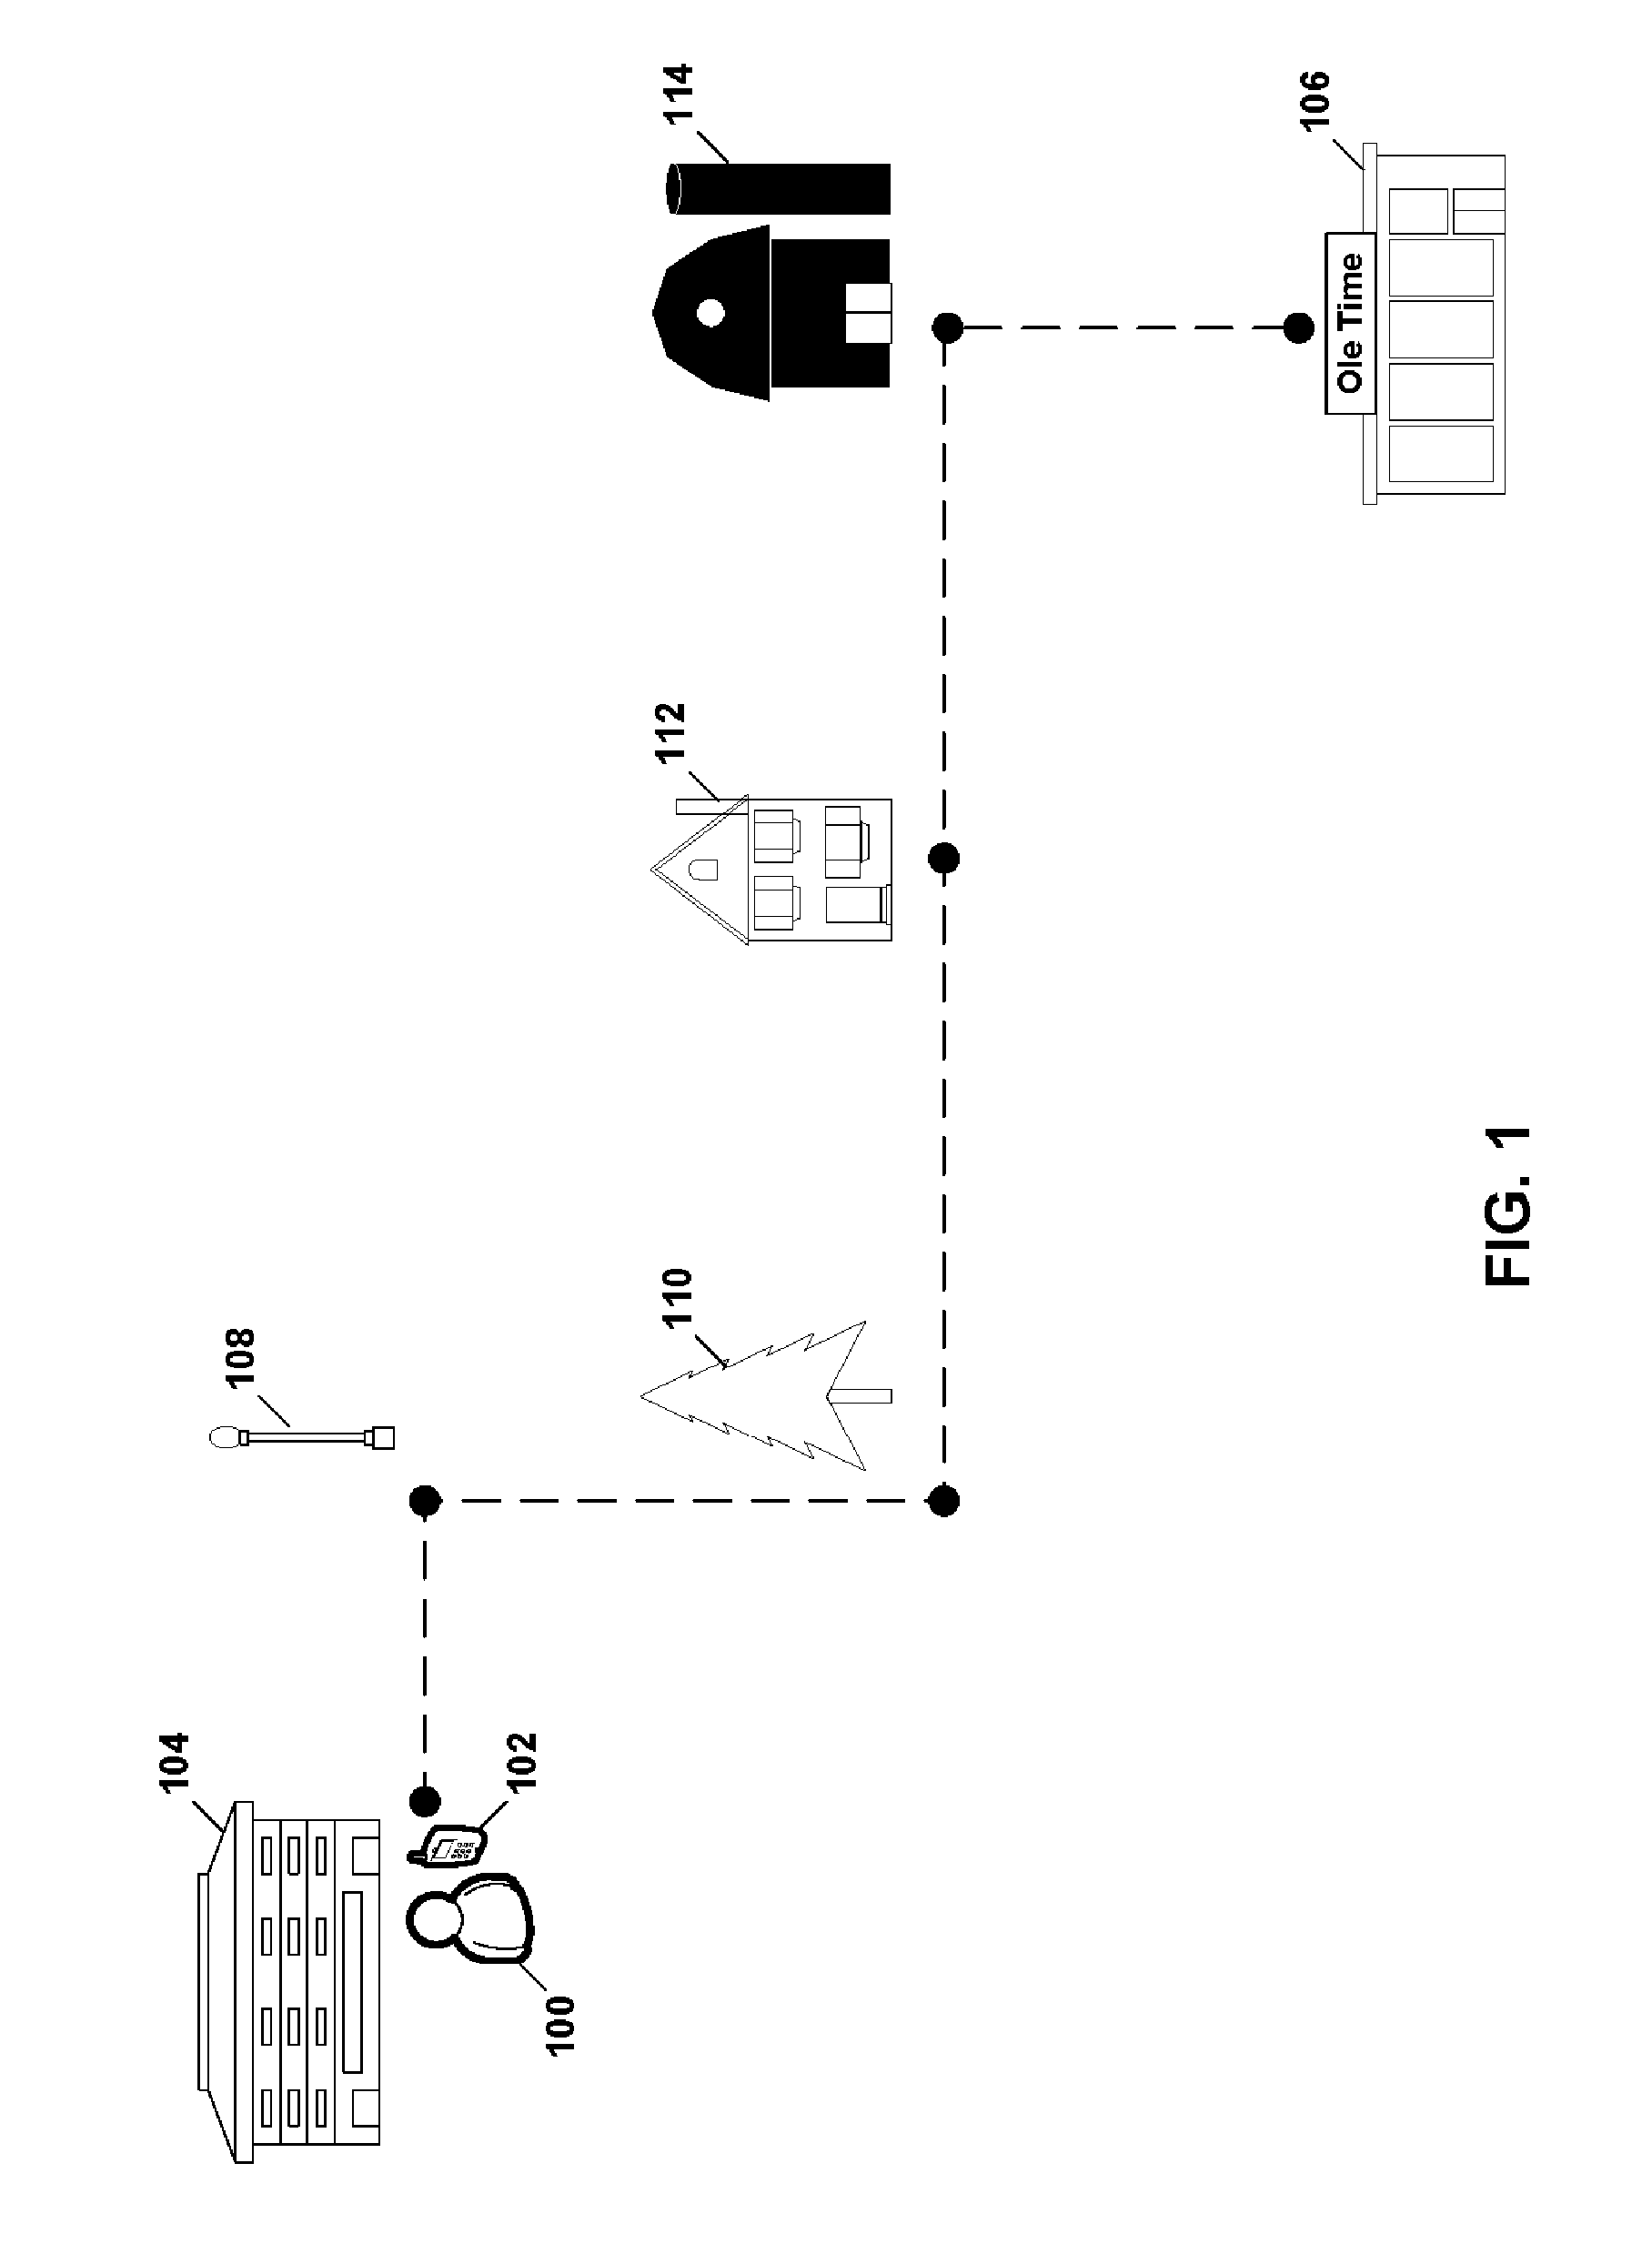 Methods, systems, and computer program products for indicating a return route in a mobile device